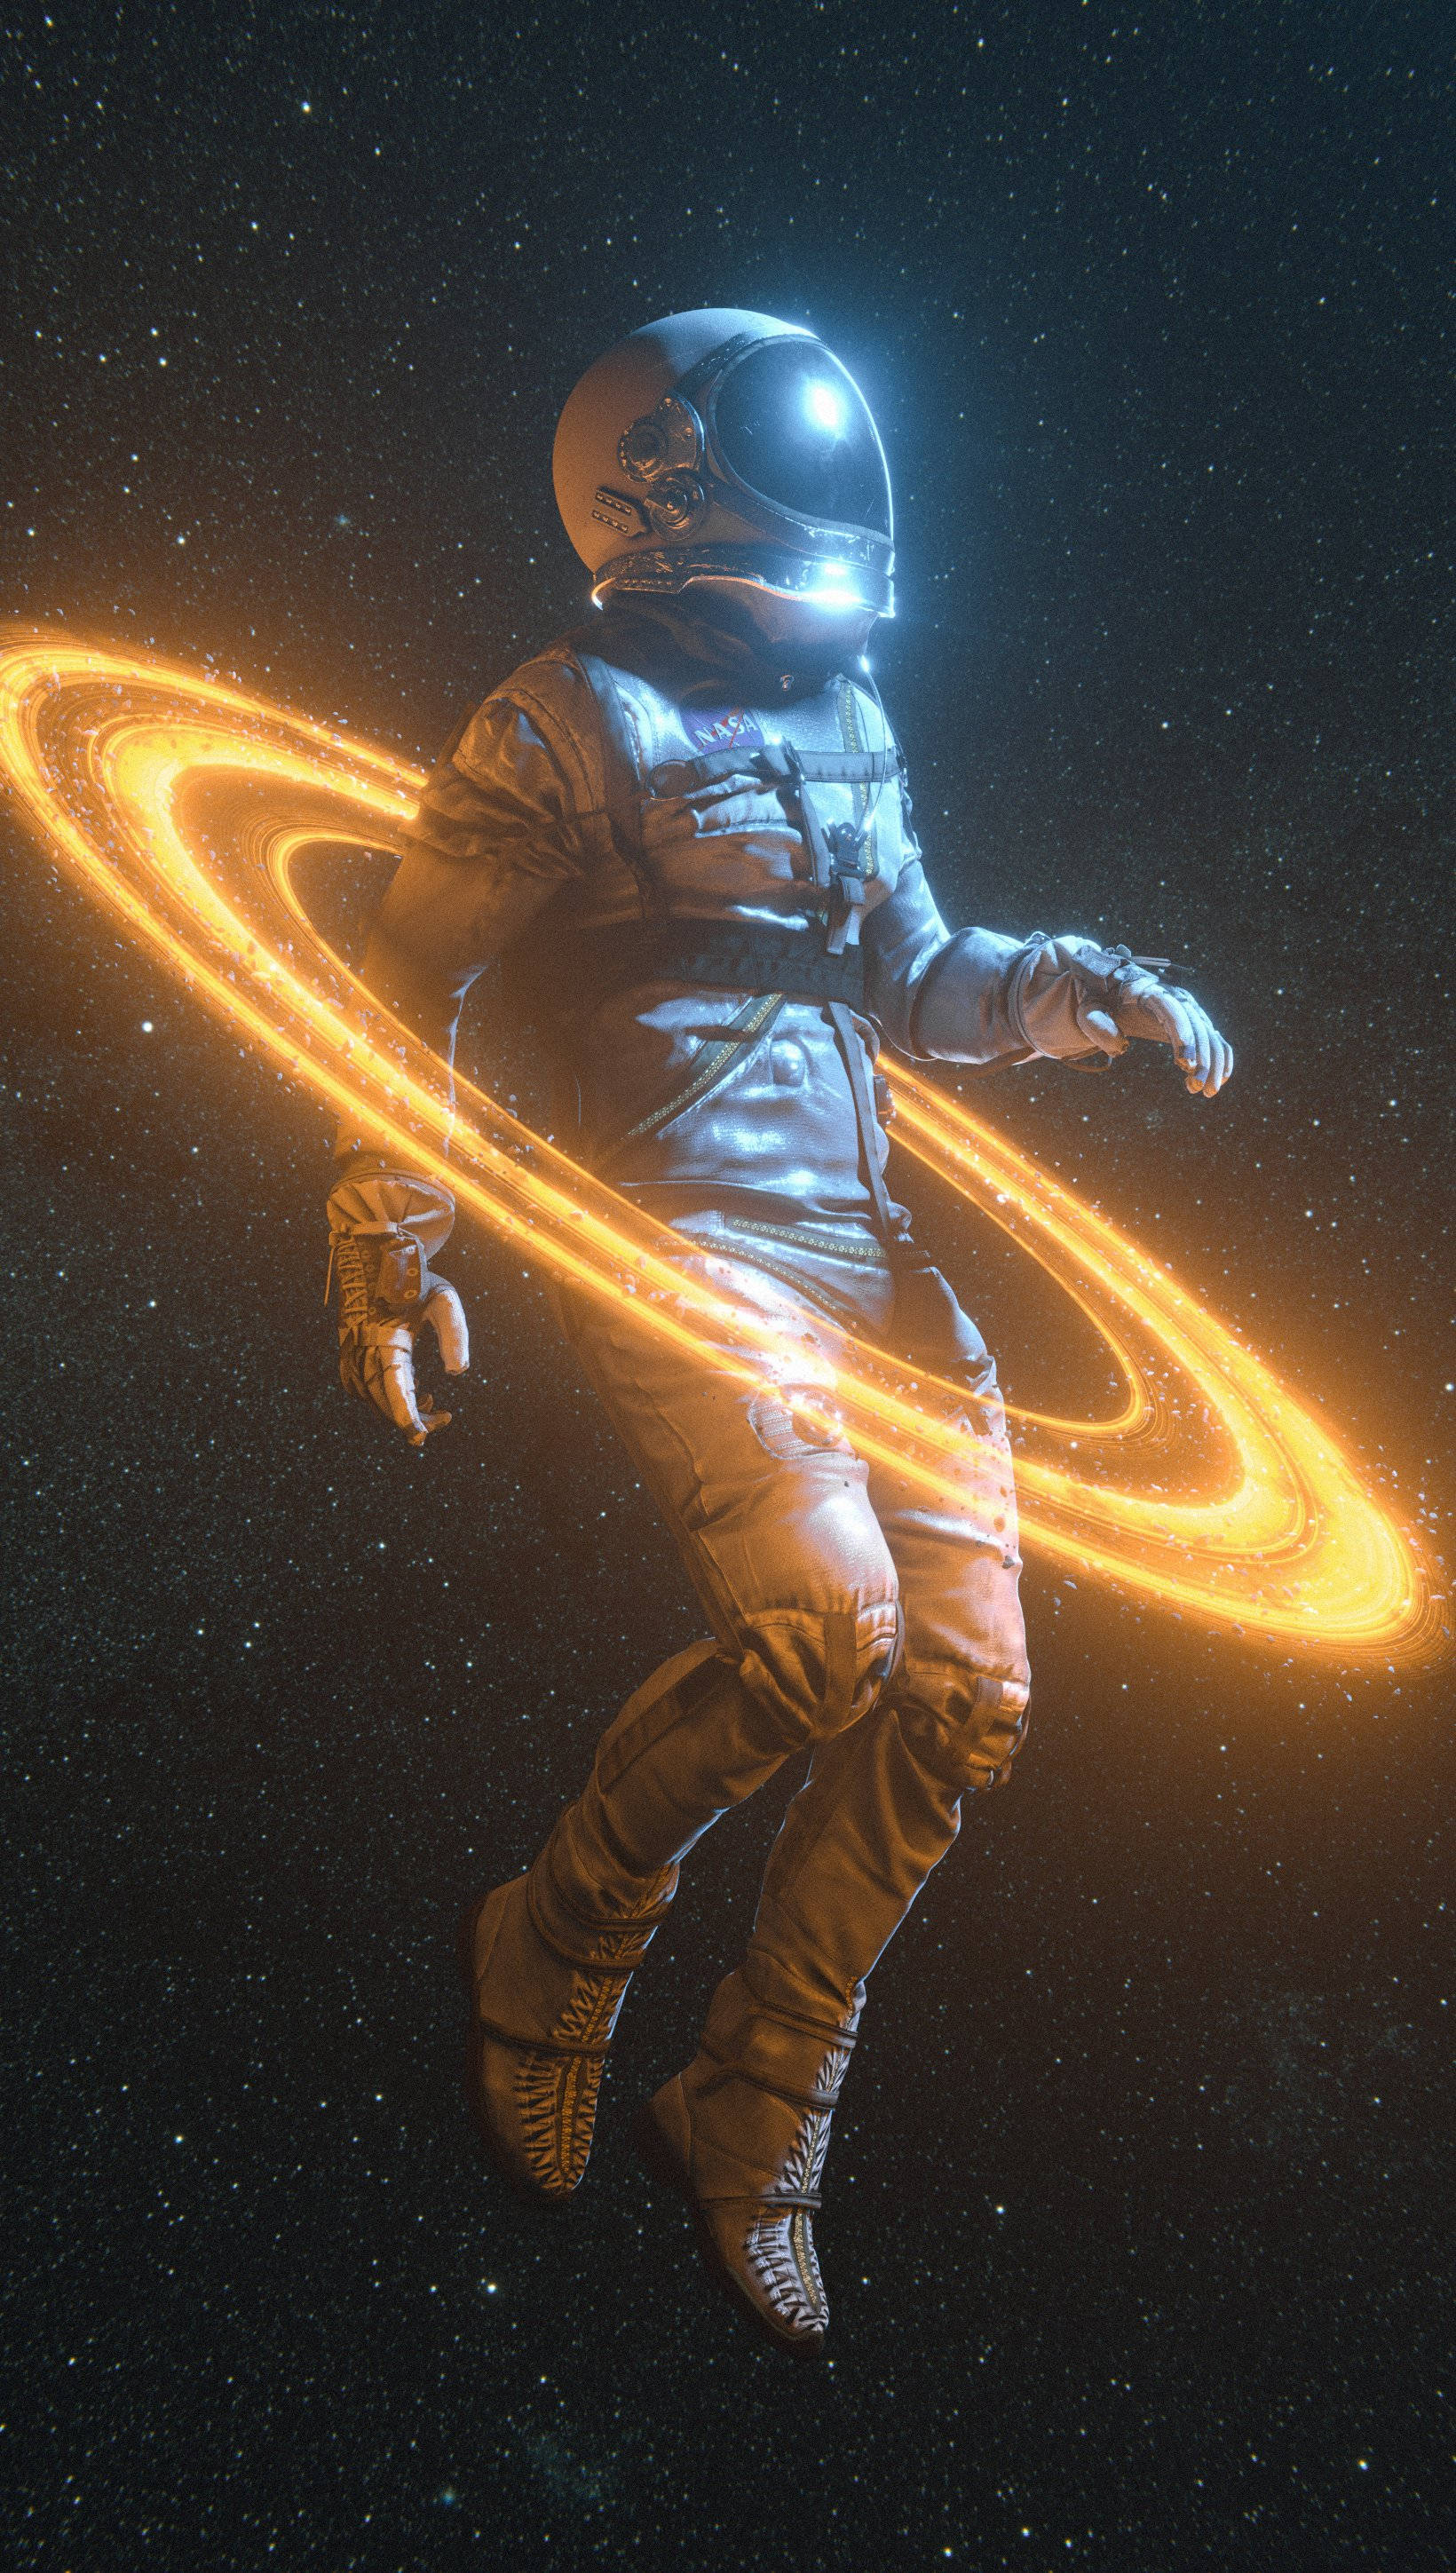 Download Astronaut With Planetary Rings Cool Android Wallpaper